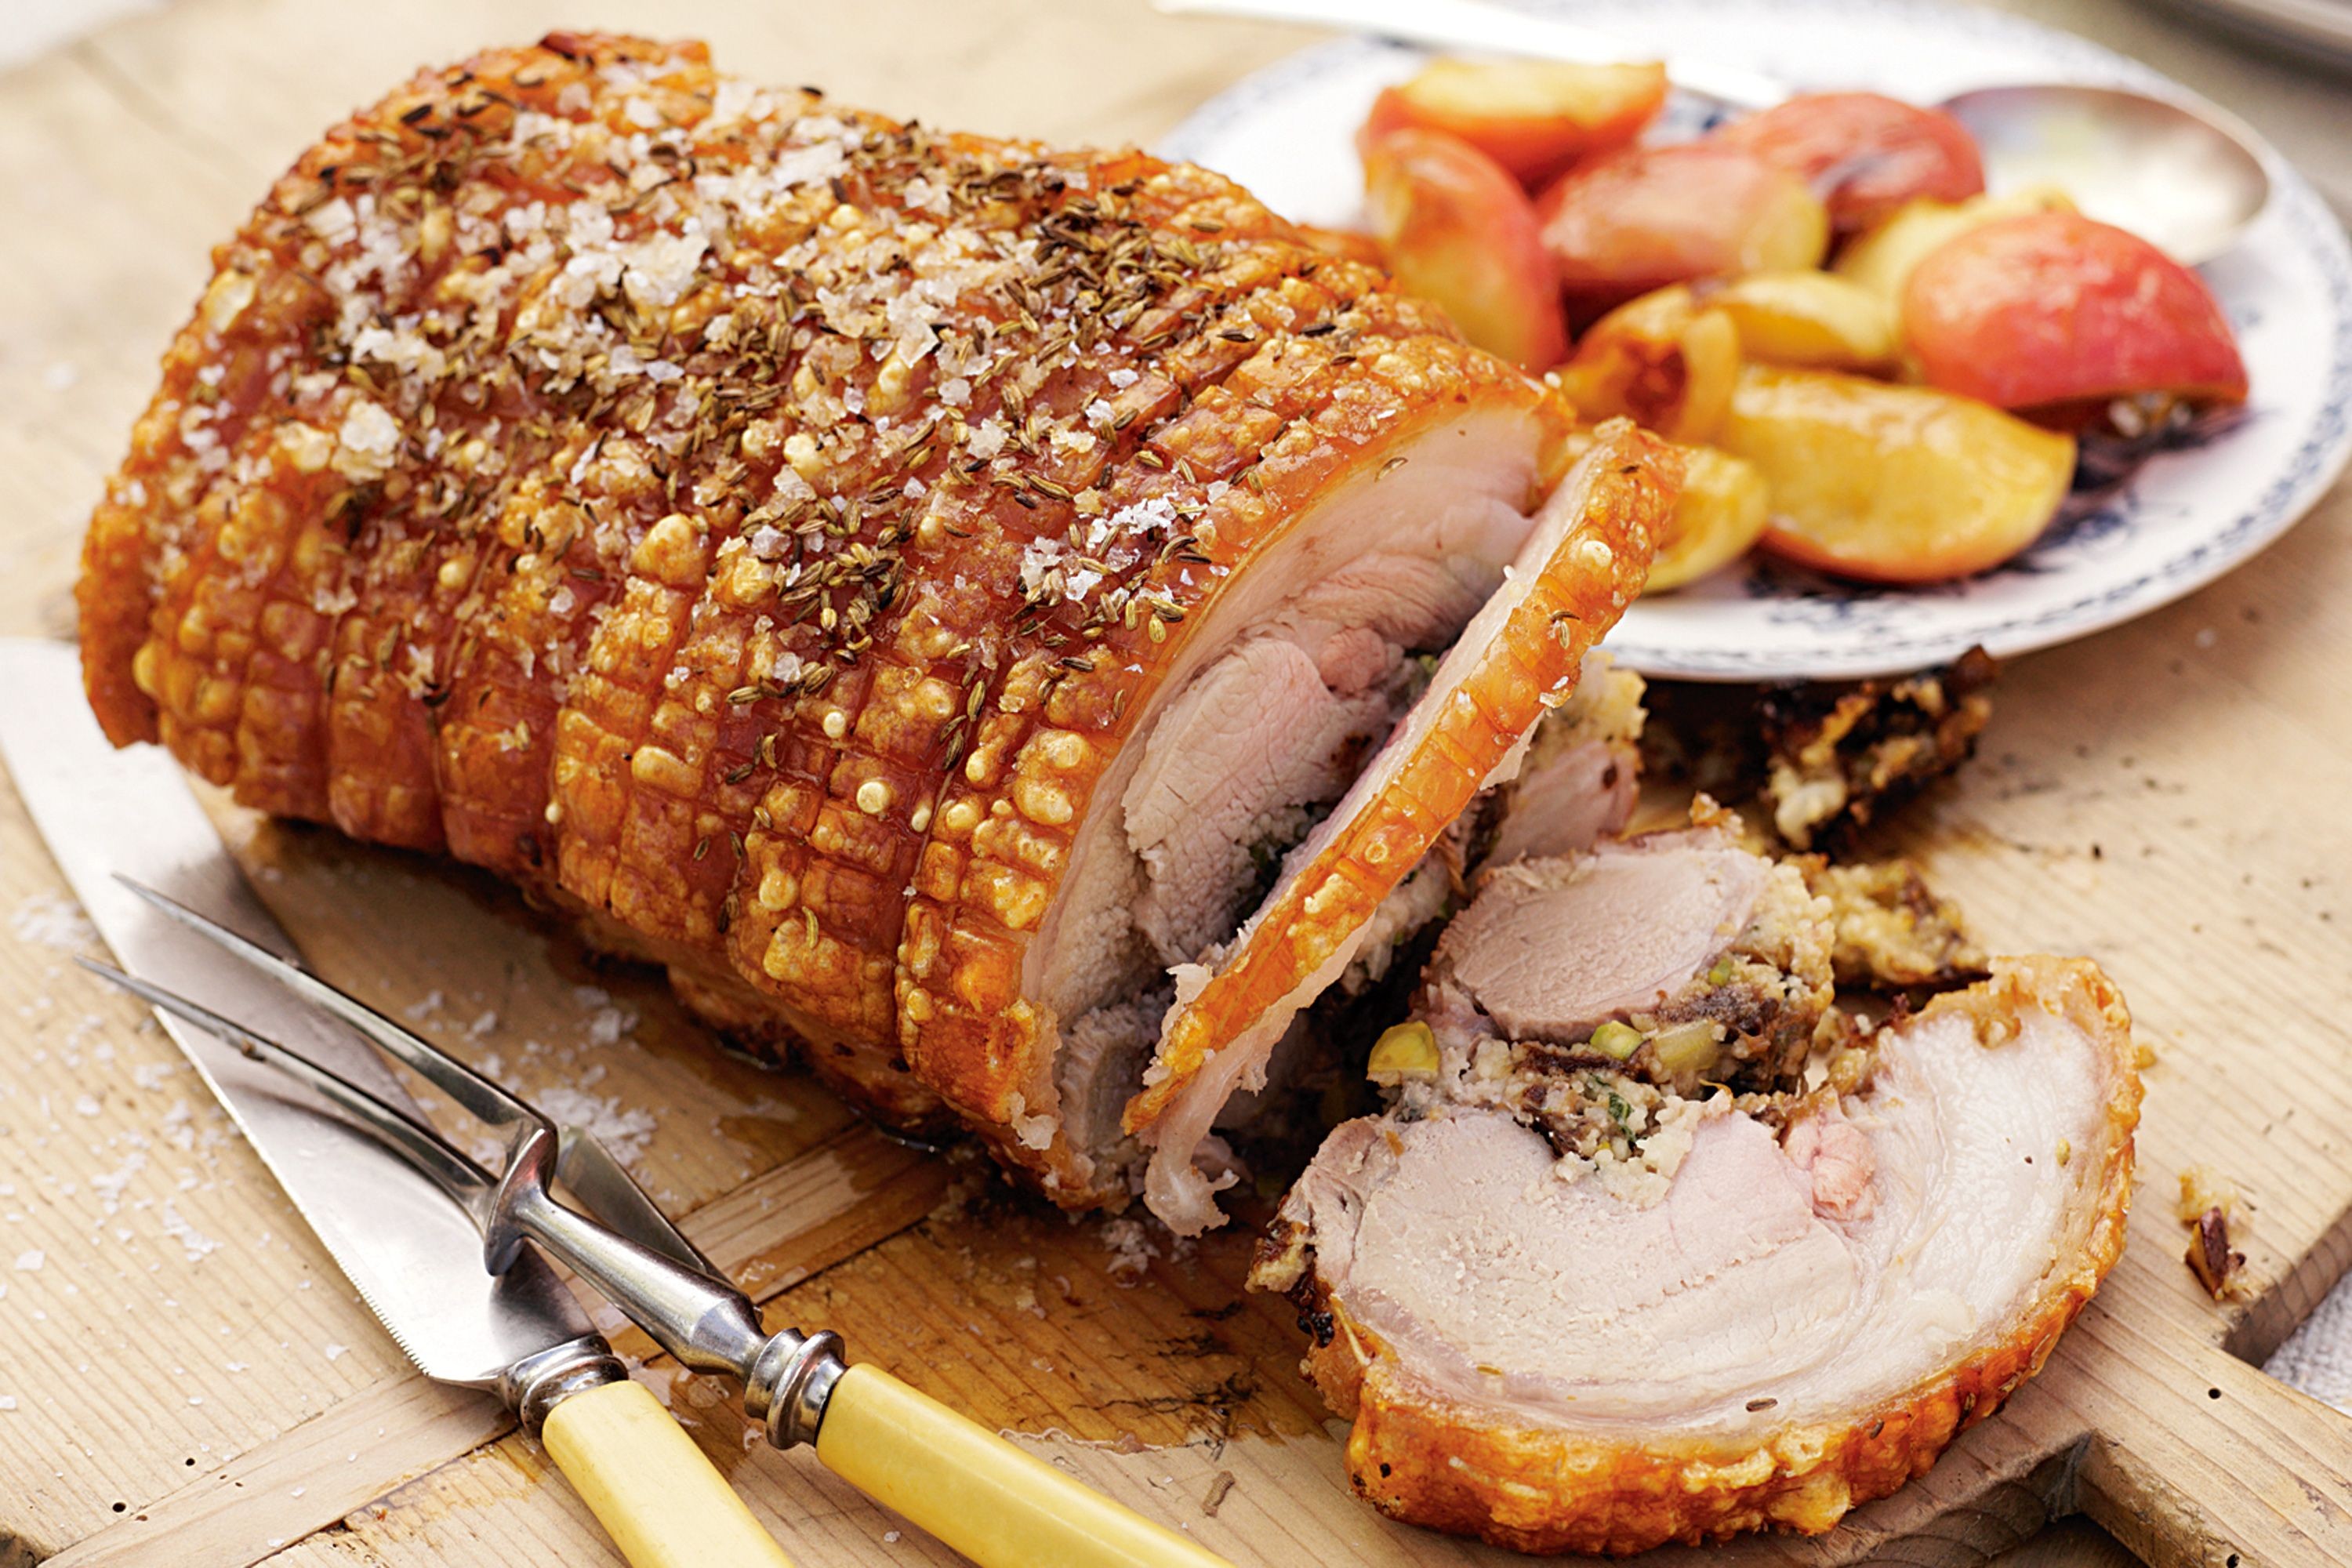 Prune and couscous stuffed roast pork with baby apples